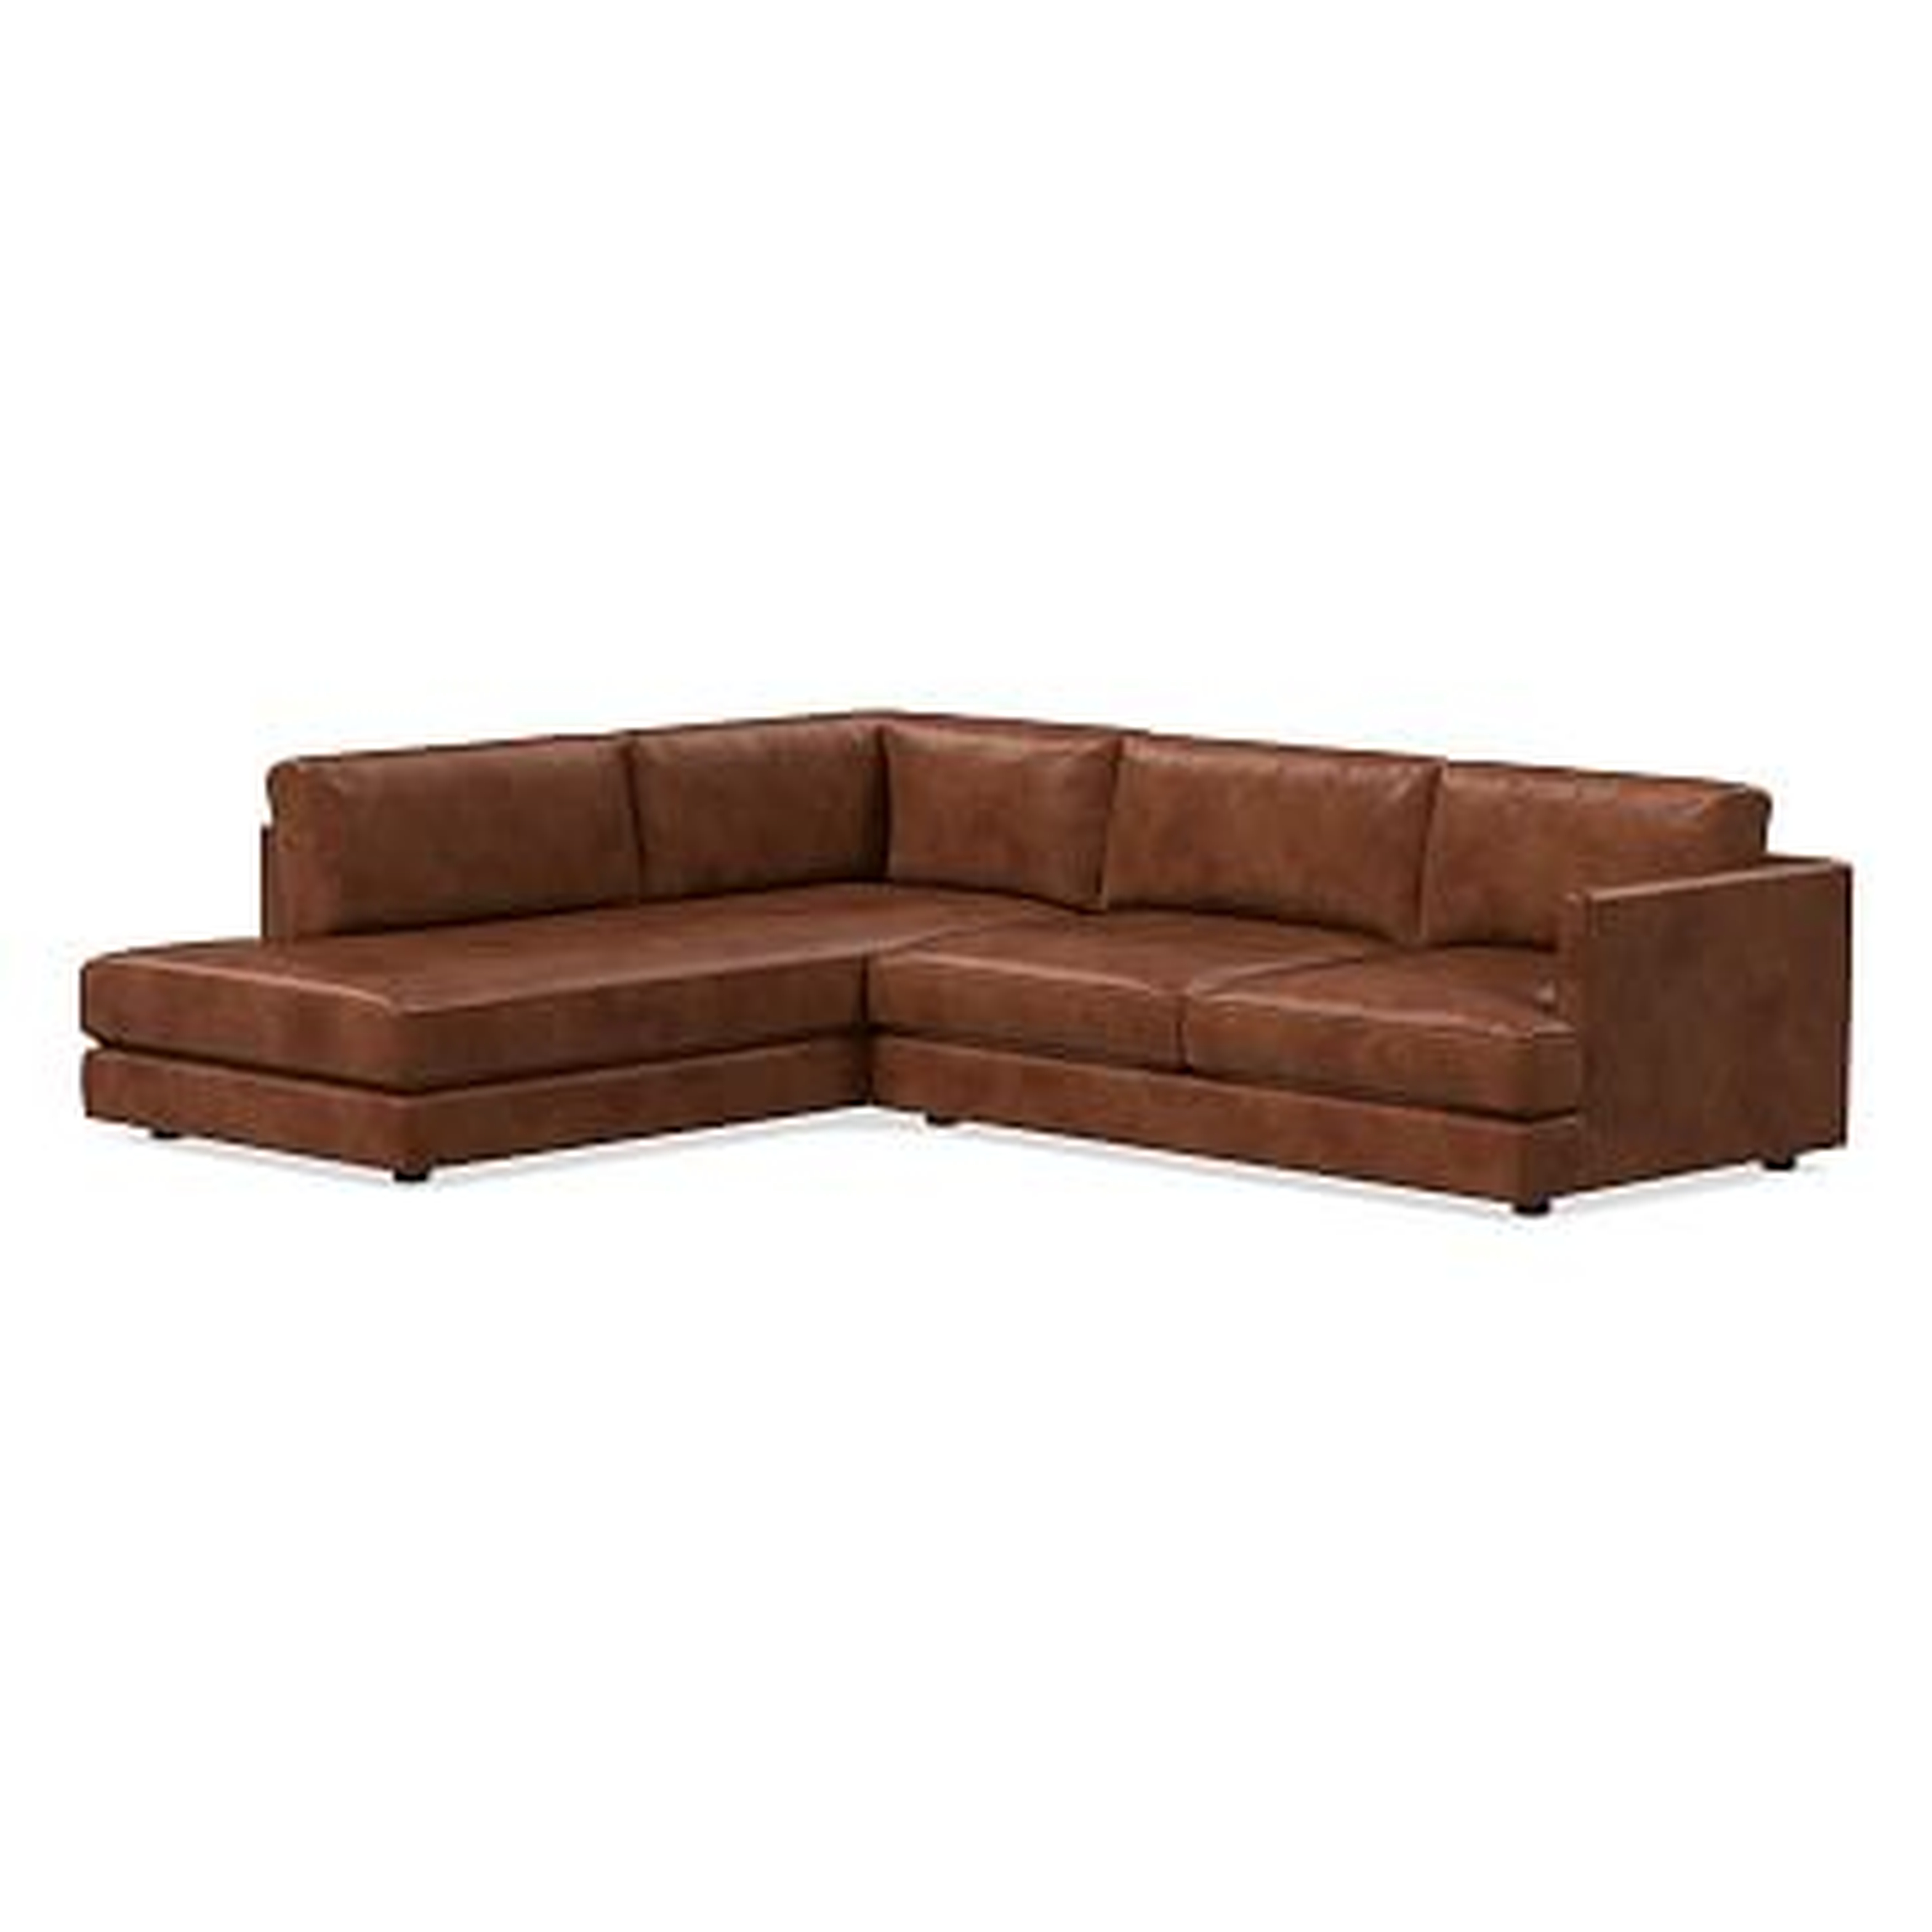 Haven Sectional Set 02: Right Arm Sofa, Left Arm Terminal Chaise, Poly, Weston Leather, Molasses - West Elm